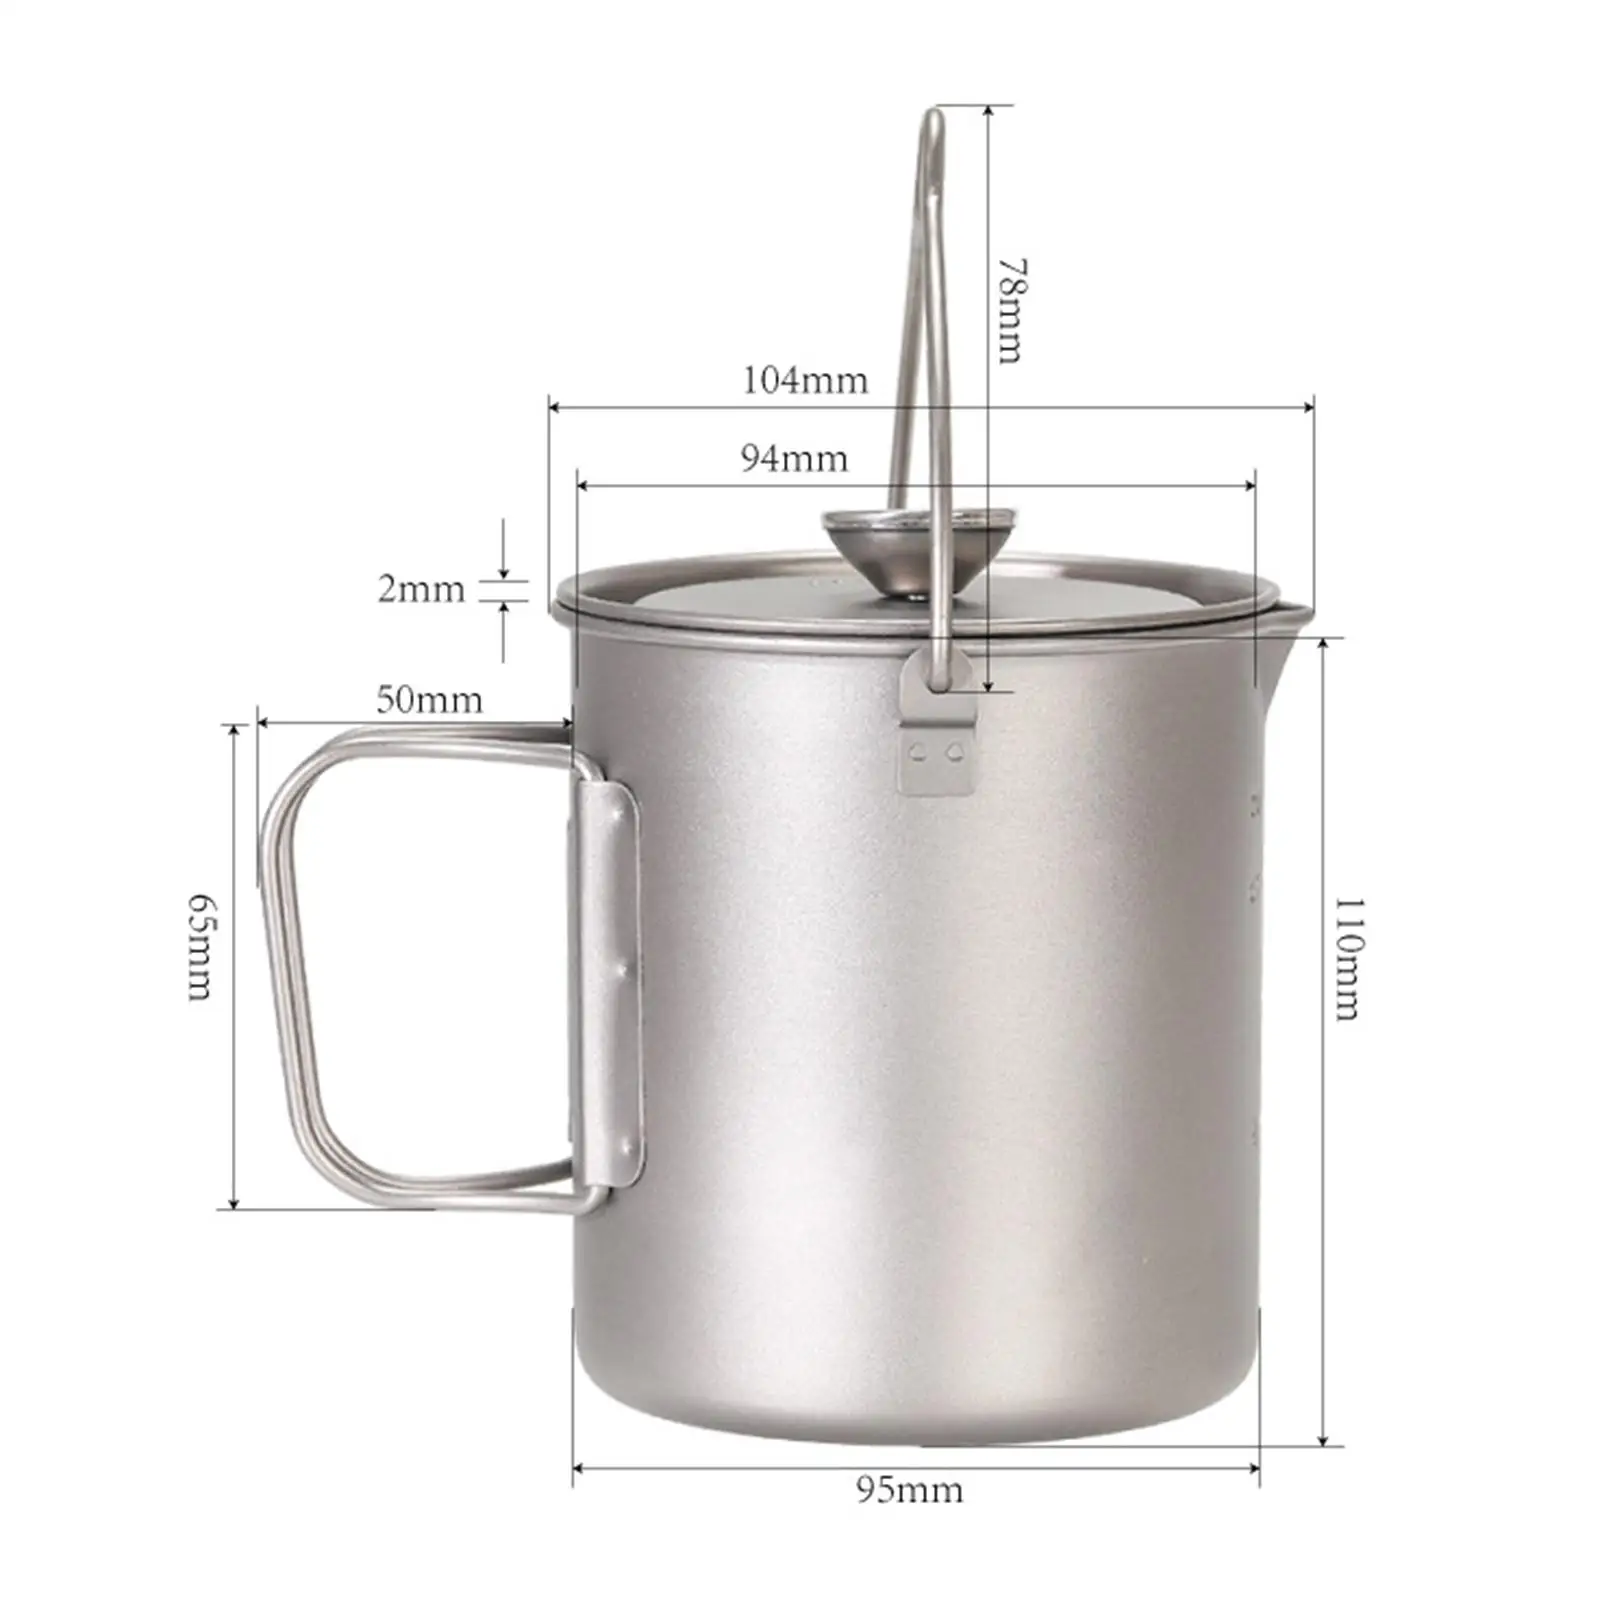 Portable French Press Pot Teakettle Kitchenware Cookware Titanium Coffee Cup Mug for Travel Fishing Outdoor Campfire Backpacking